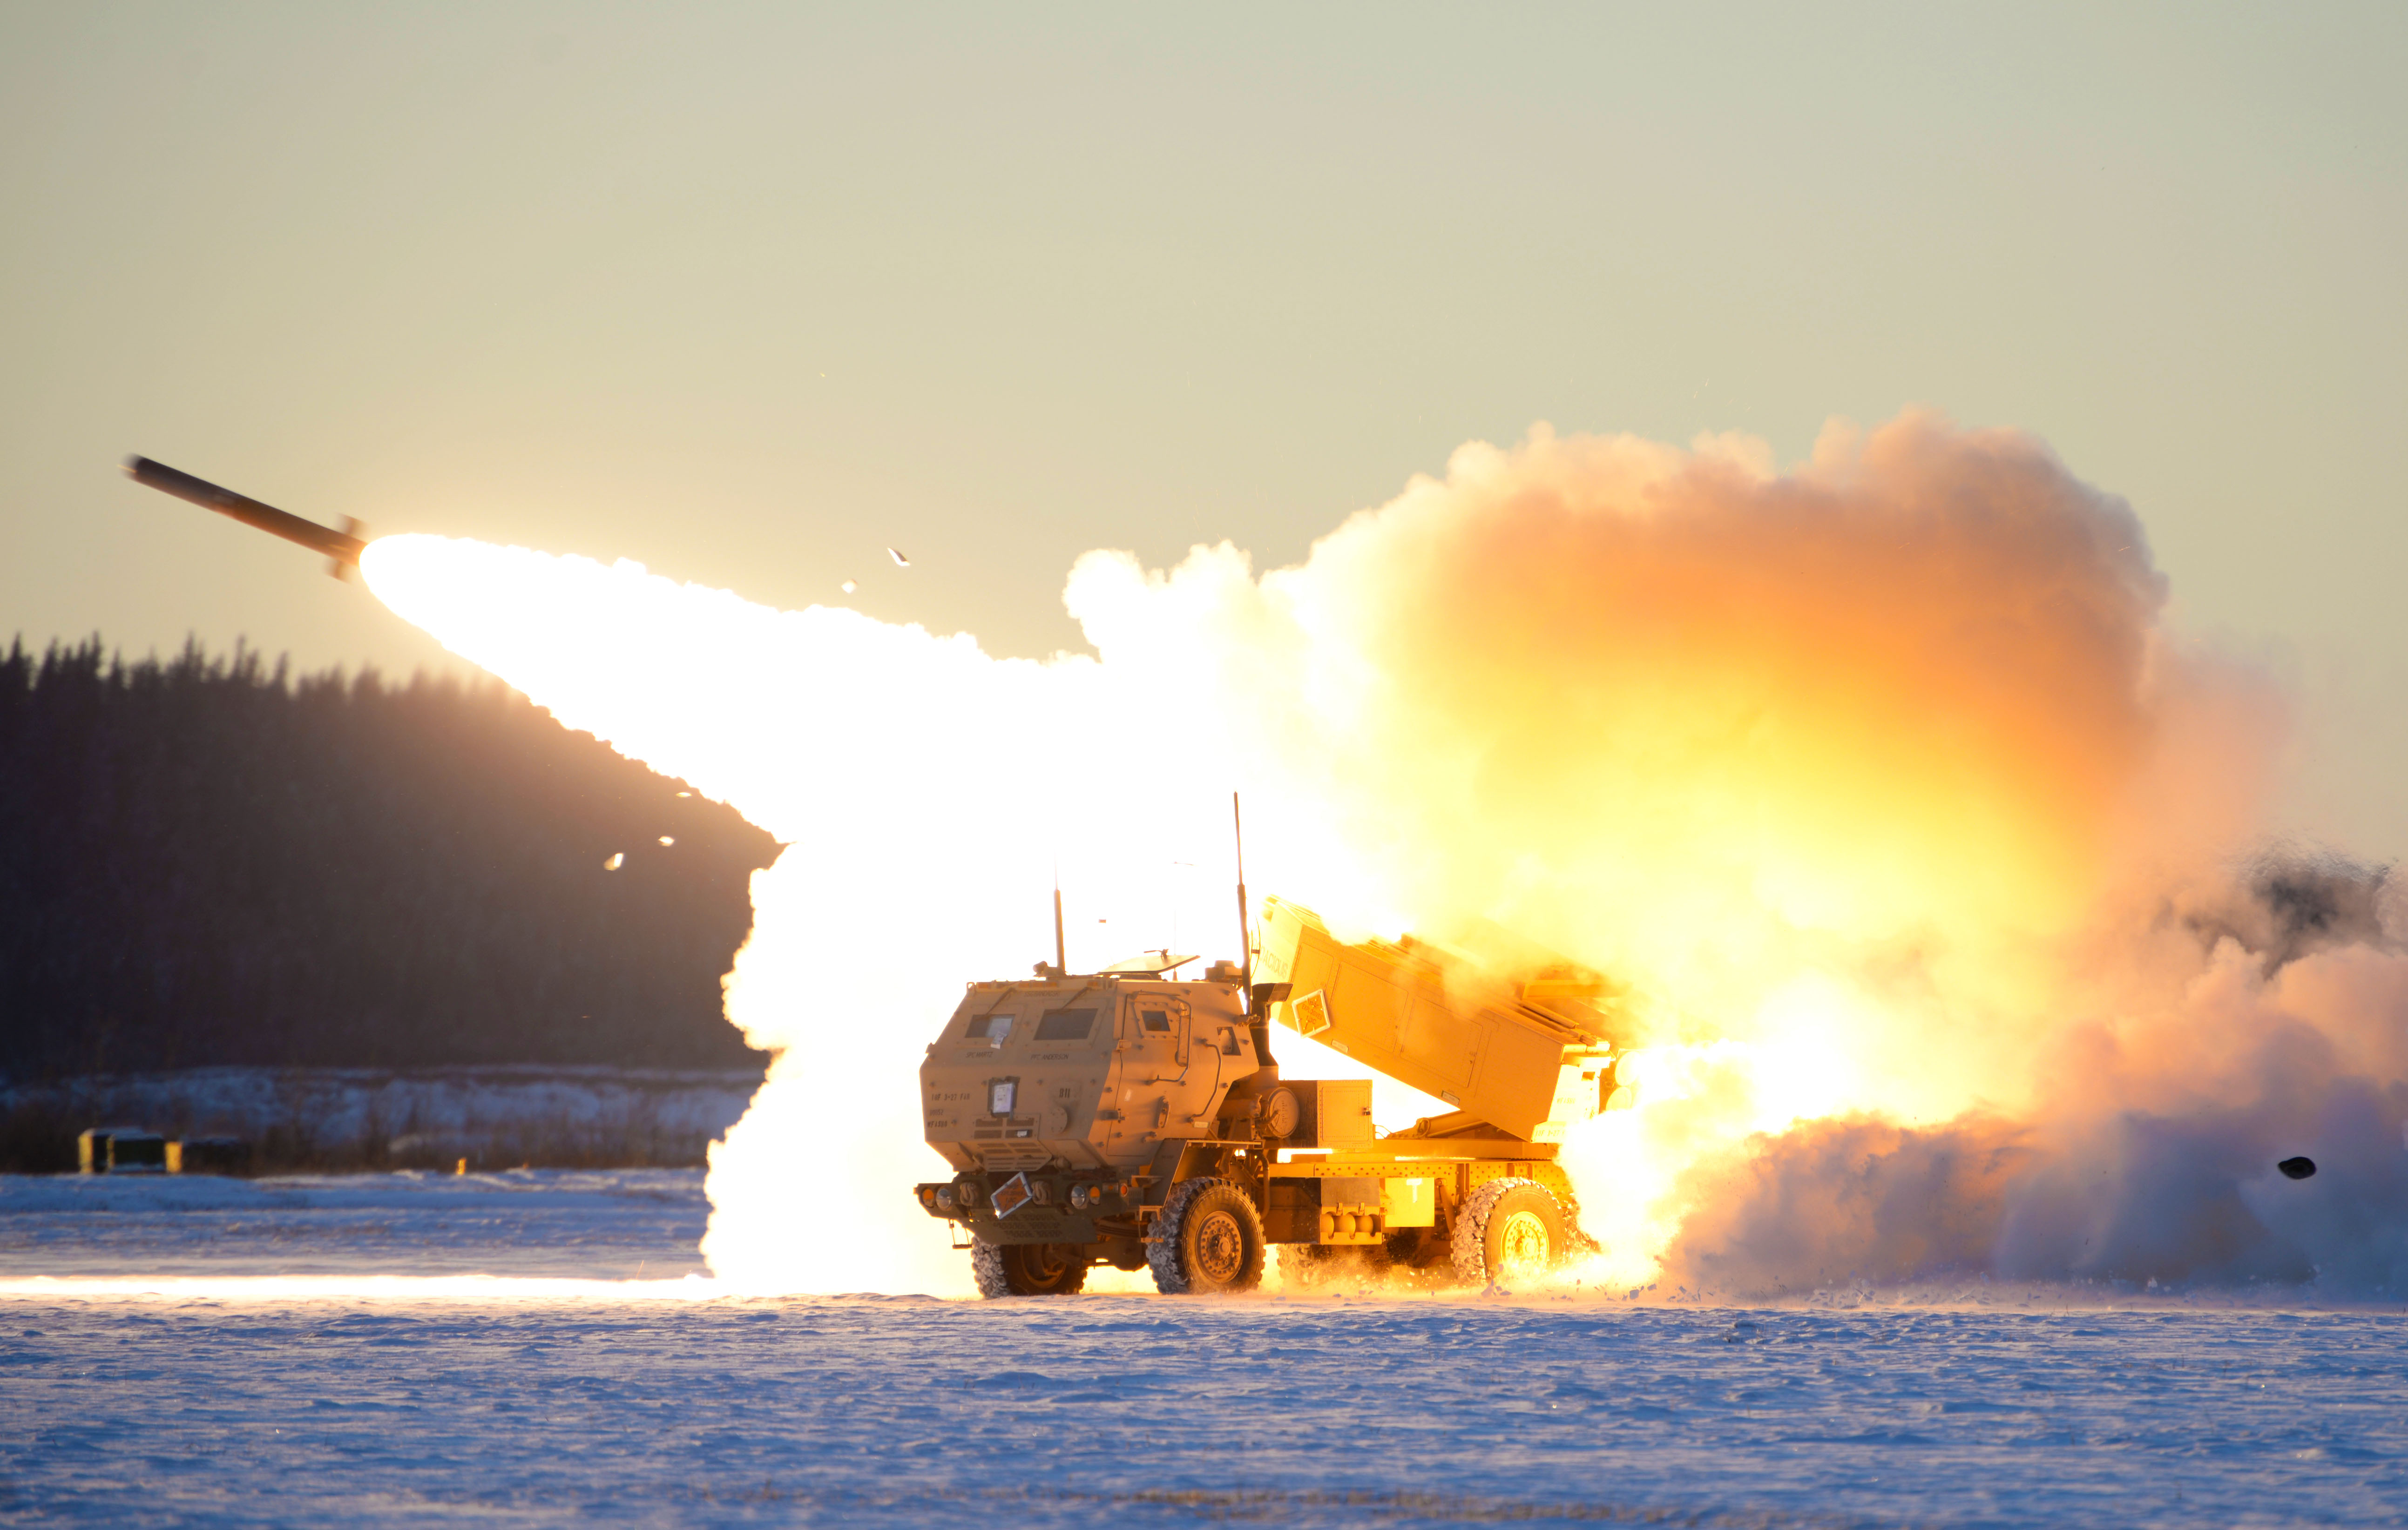 Ukraine Says It Received HIMARS Precision Rocket Launchers From US